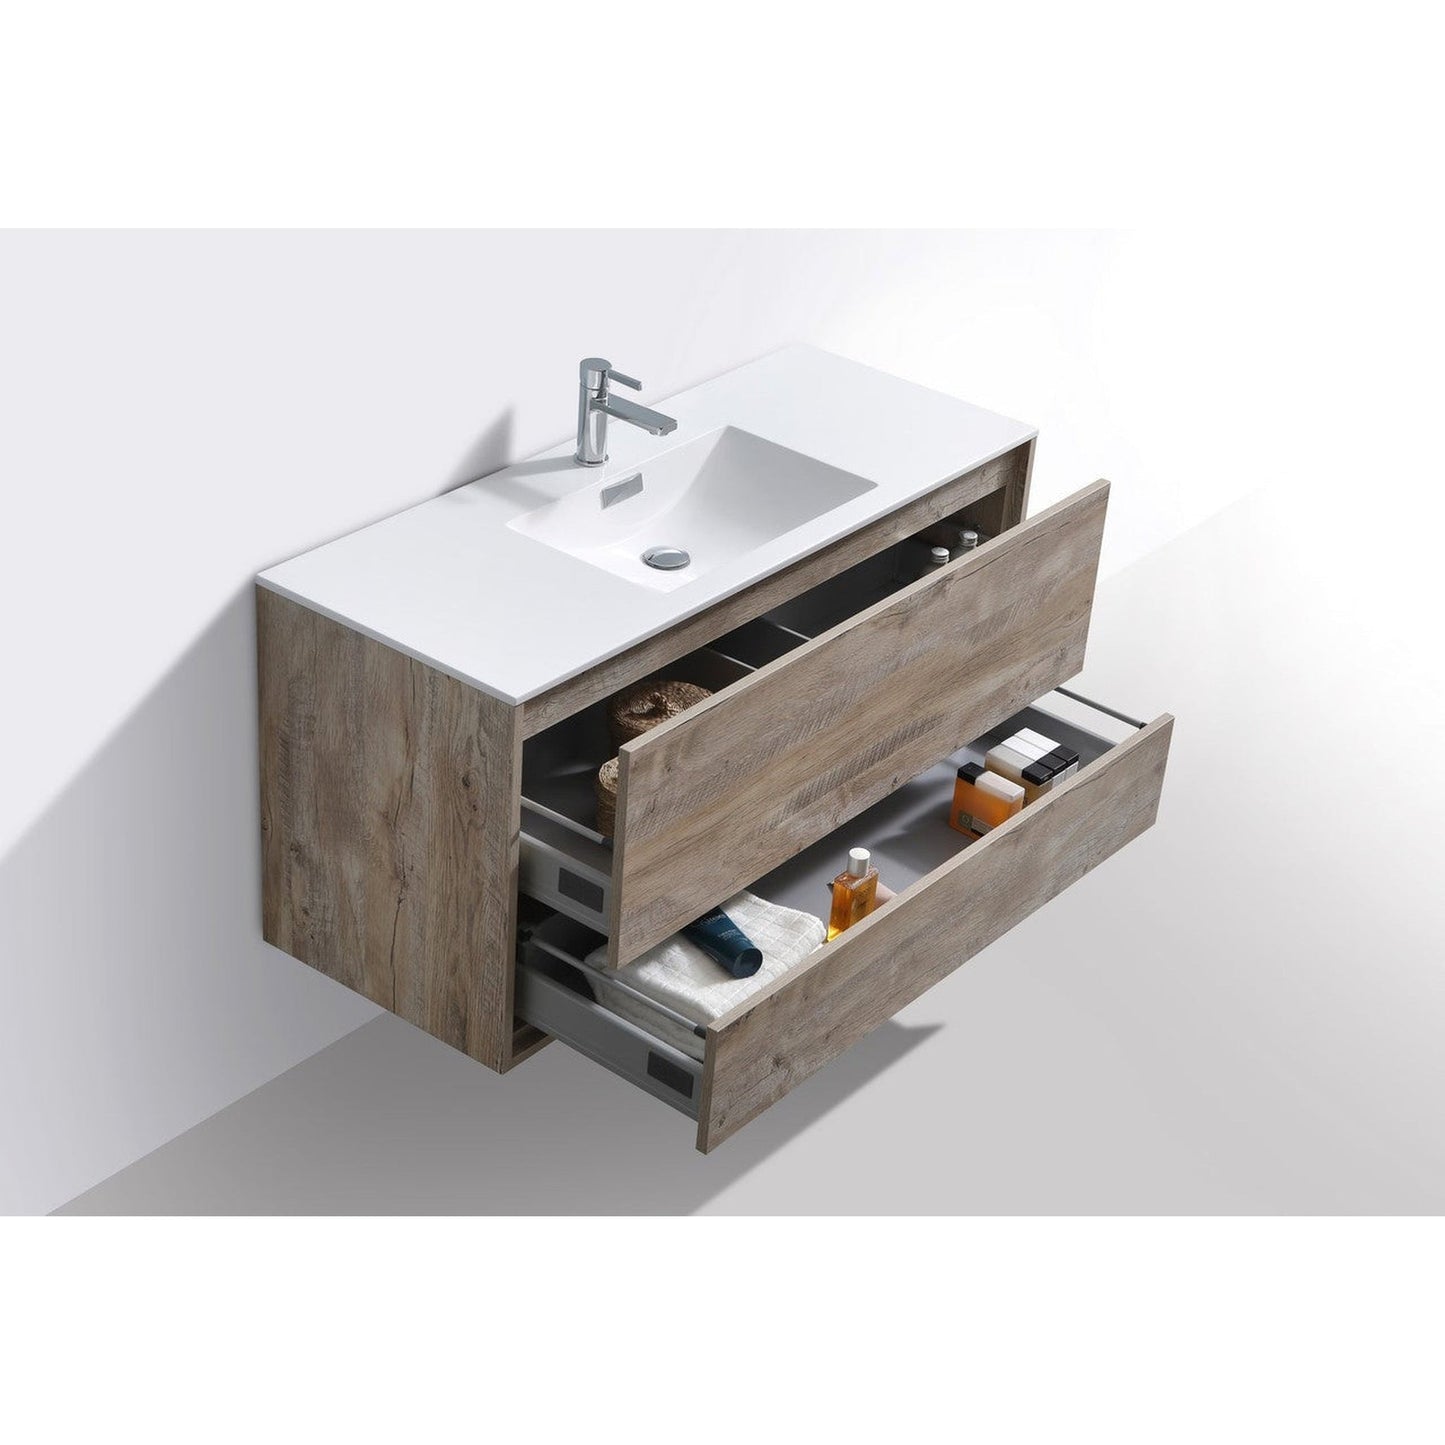 KubeBath DeLusso 48" Nature Wood Wall-Mounted Modern Bathroom Vanity With Single Integrated Acrylic Sink With Overflow and 48" Wood Framed Mirror With Shelf